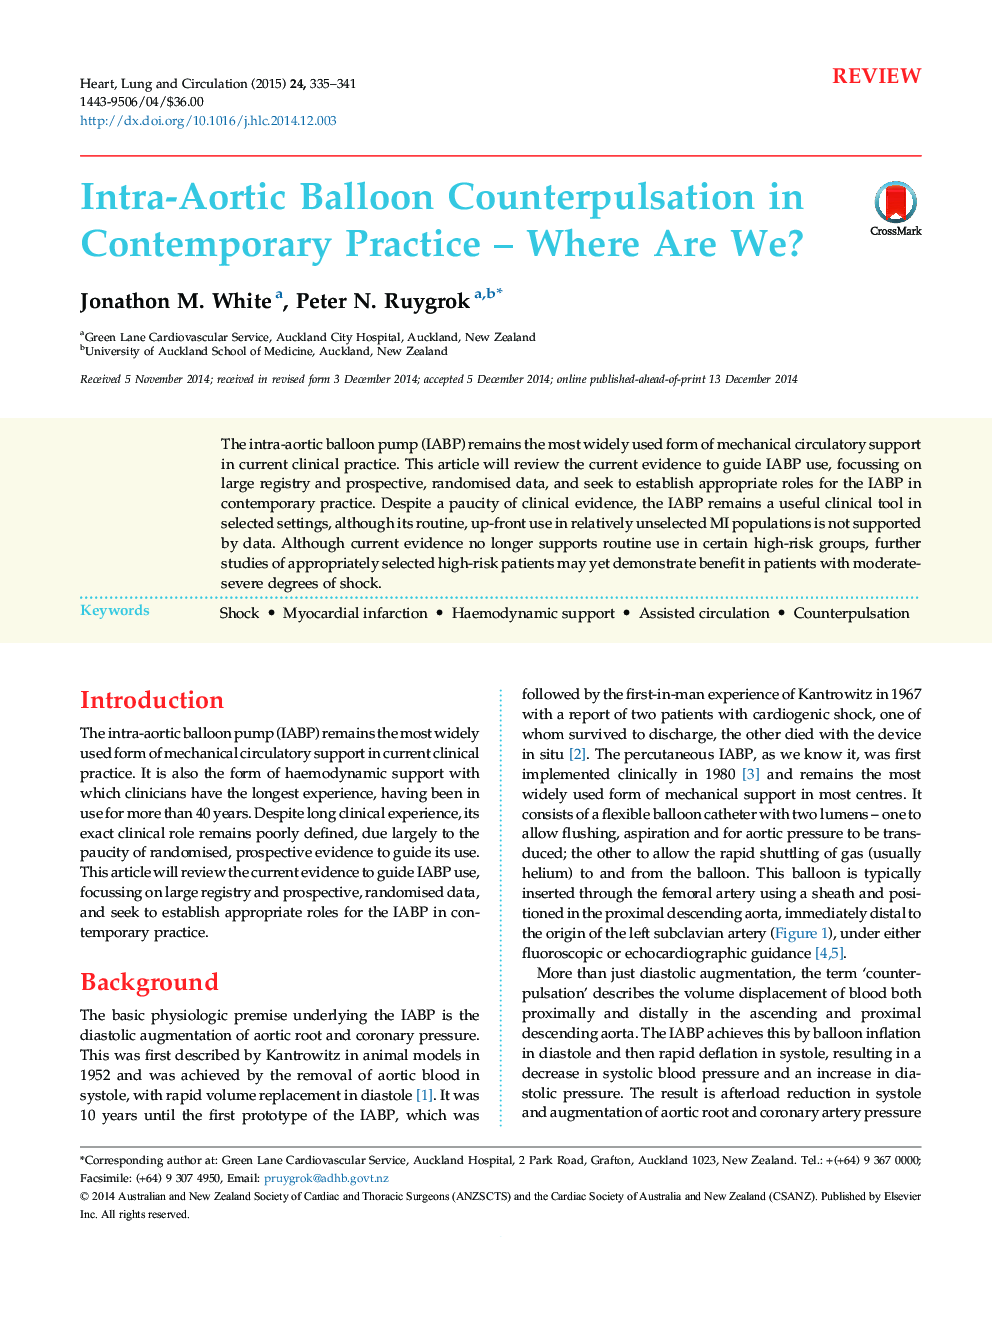 Intra-Aortic Balloon Counterpulsation in Contemporary Practice – Where Are We?